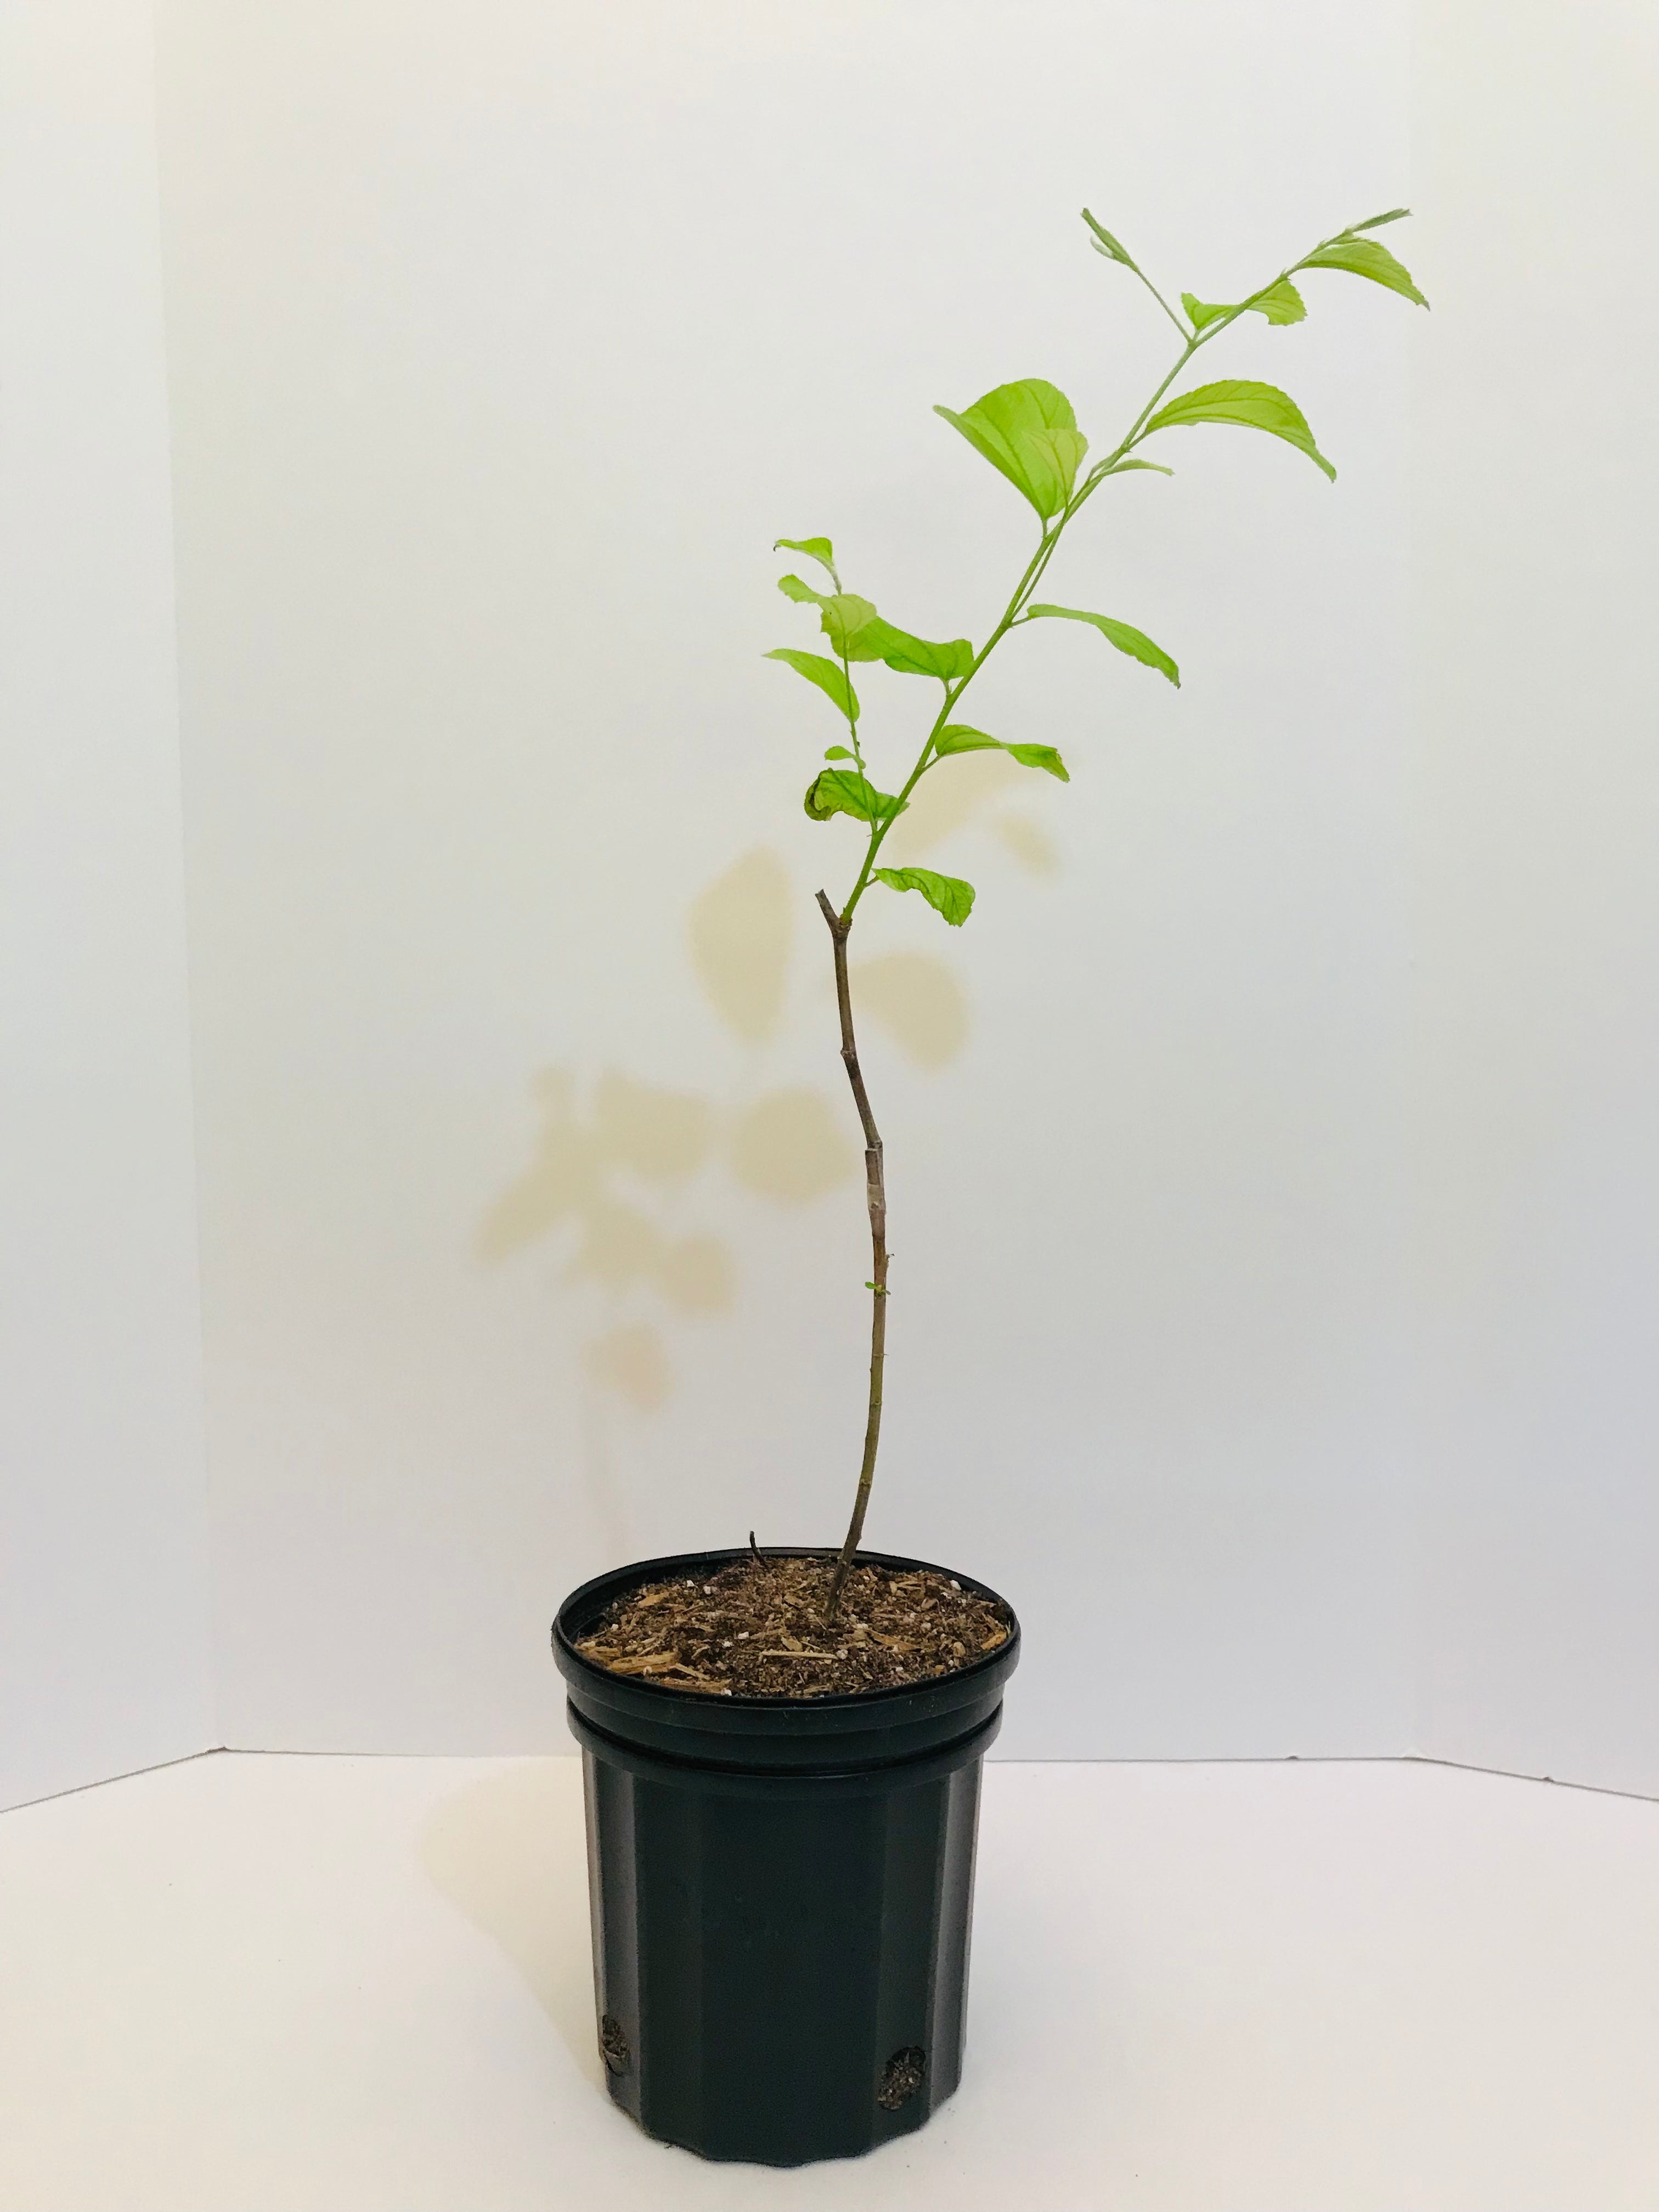 Grafted Jujubee tree 1 gallon (Taiwanese thornless, egg size fruit)